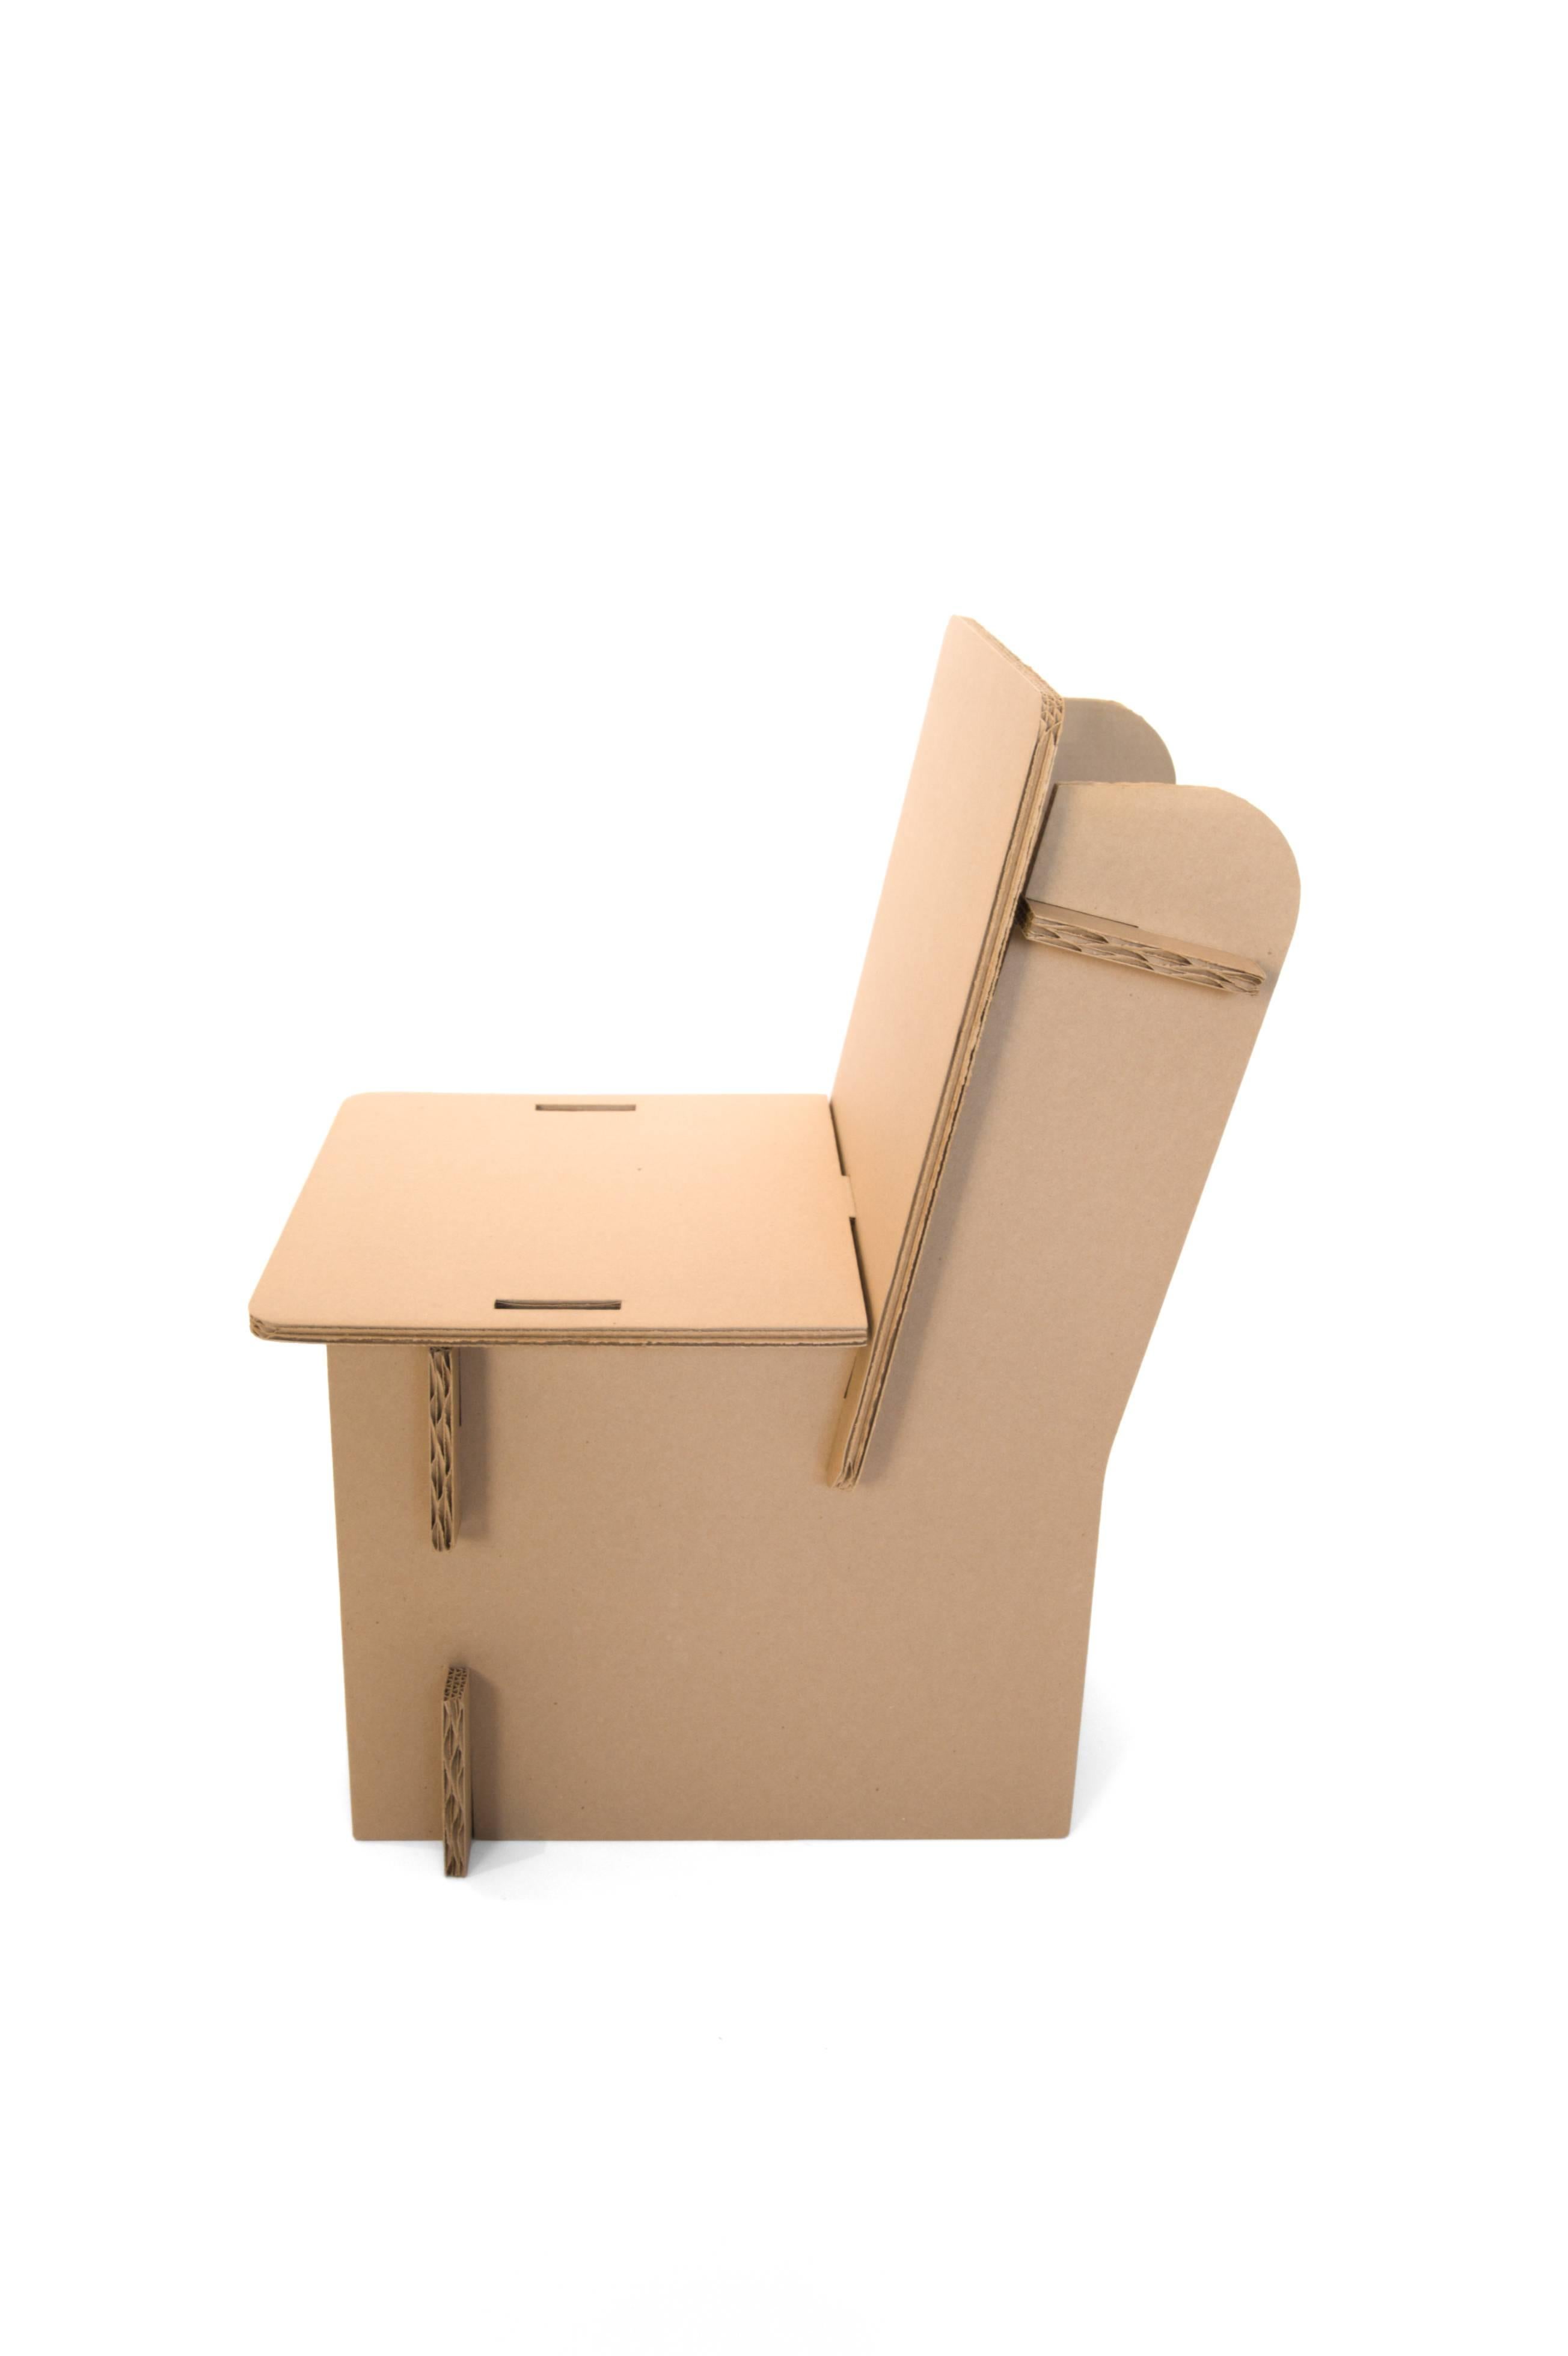 Cardboard Chair by Mixed Nuts' Crazy Crazy for the Denver Art Museum (amerikanisch) im Angebot